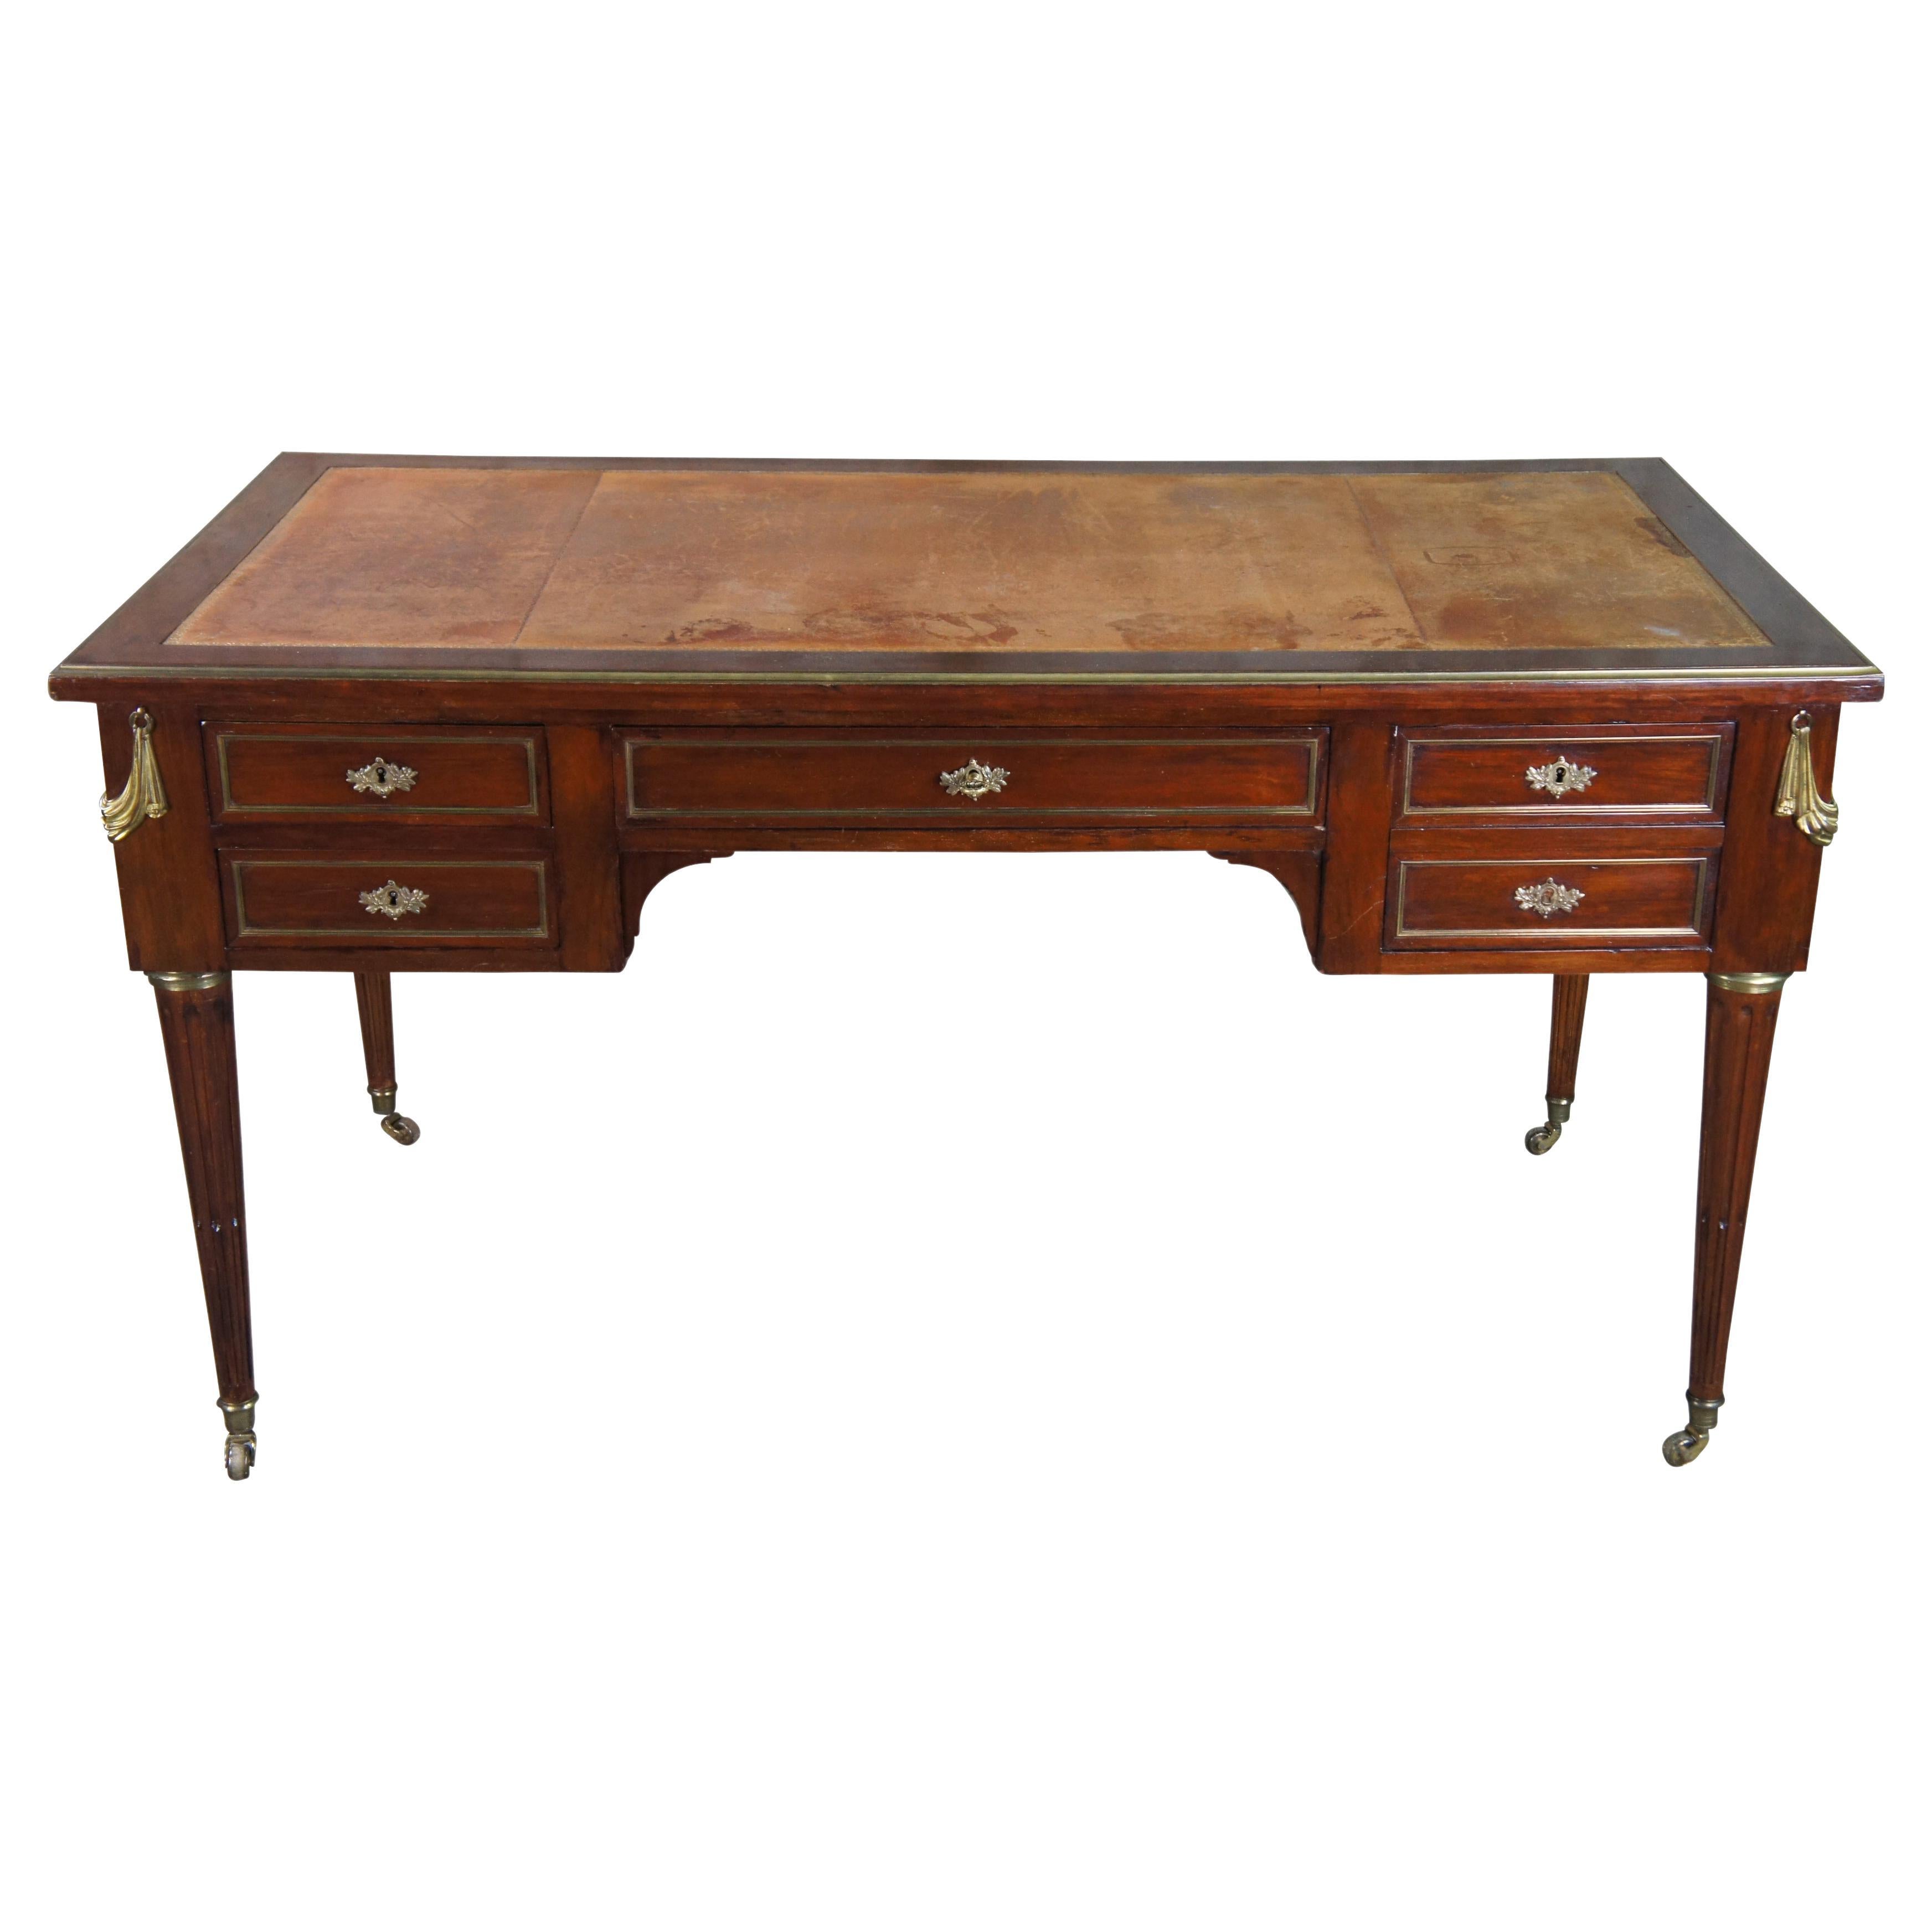 Antique French Louis XVI Neoclassical Walnut Directoire Executive Writing Desk